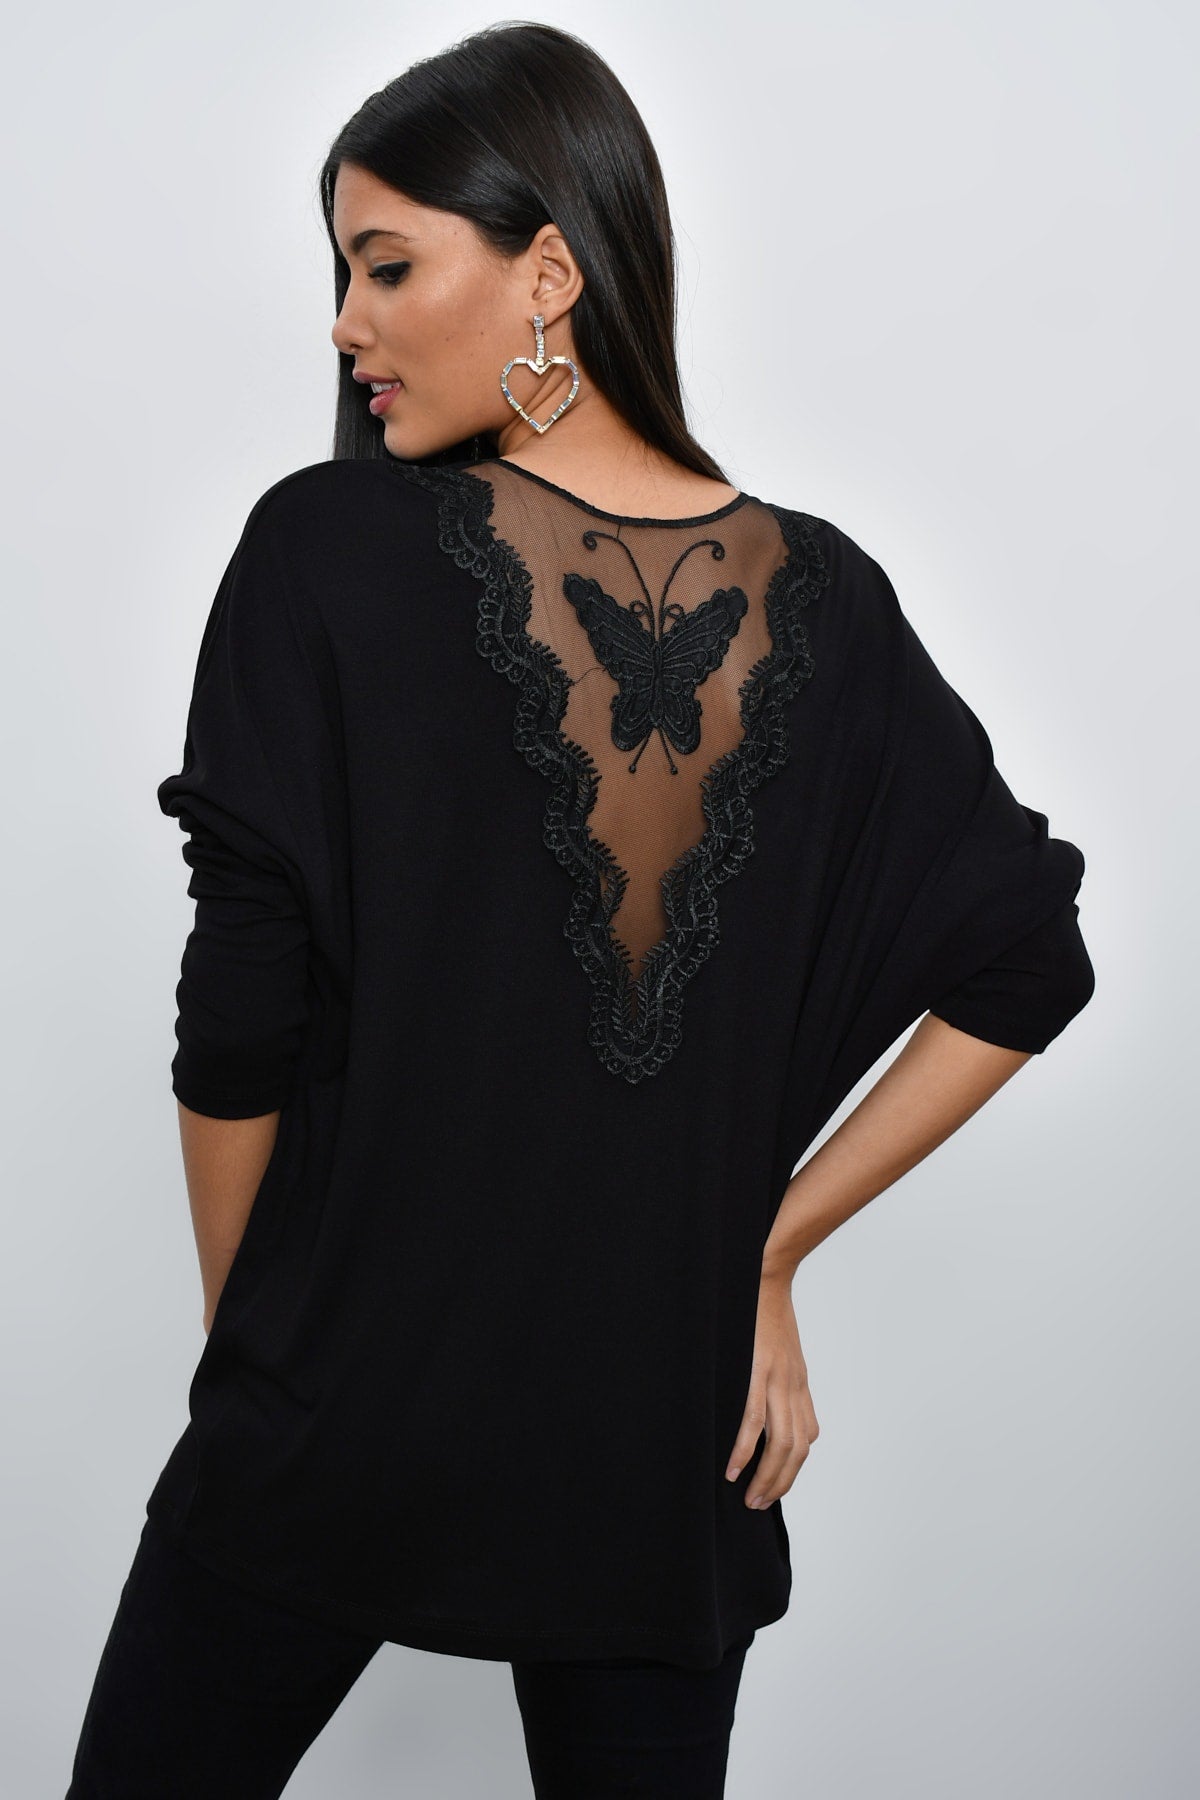 Black women's blouse with sheer details, Stylish look with sexy V-neck design, Butterfly embroidered back blouse, Plain-colored design suitable for daily and comfortable wear, Affordable black blouse made of polyester and elastane fabric